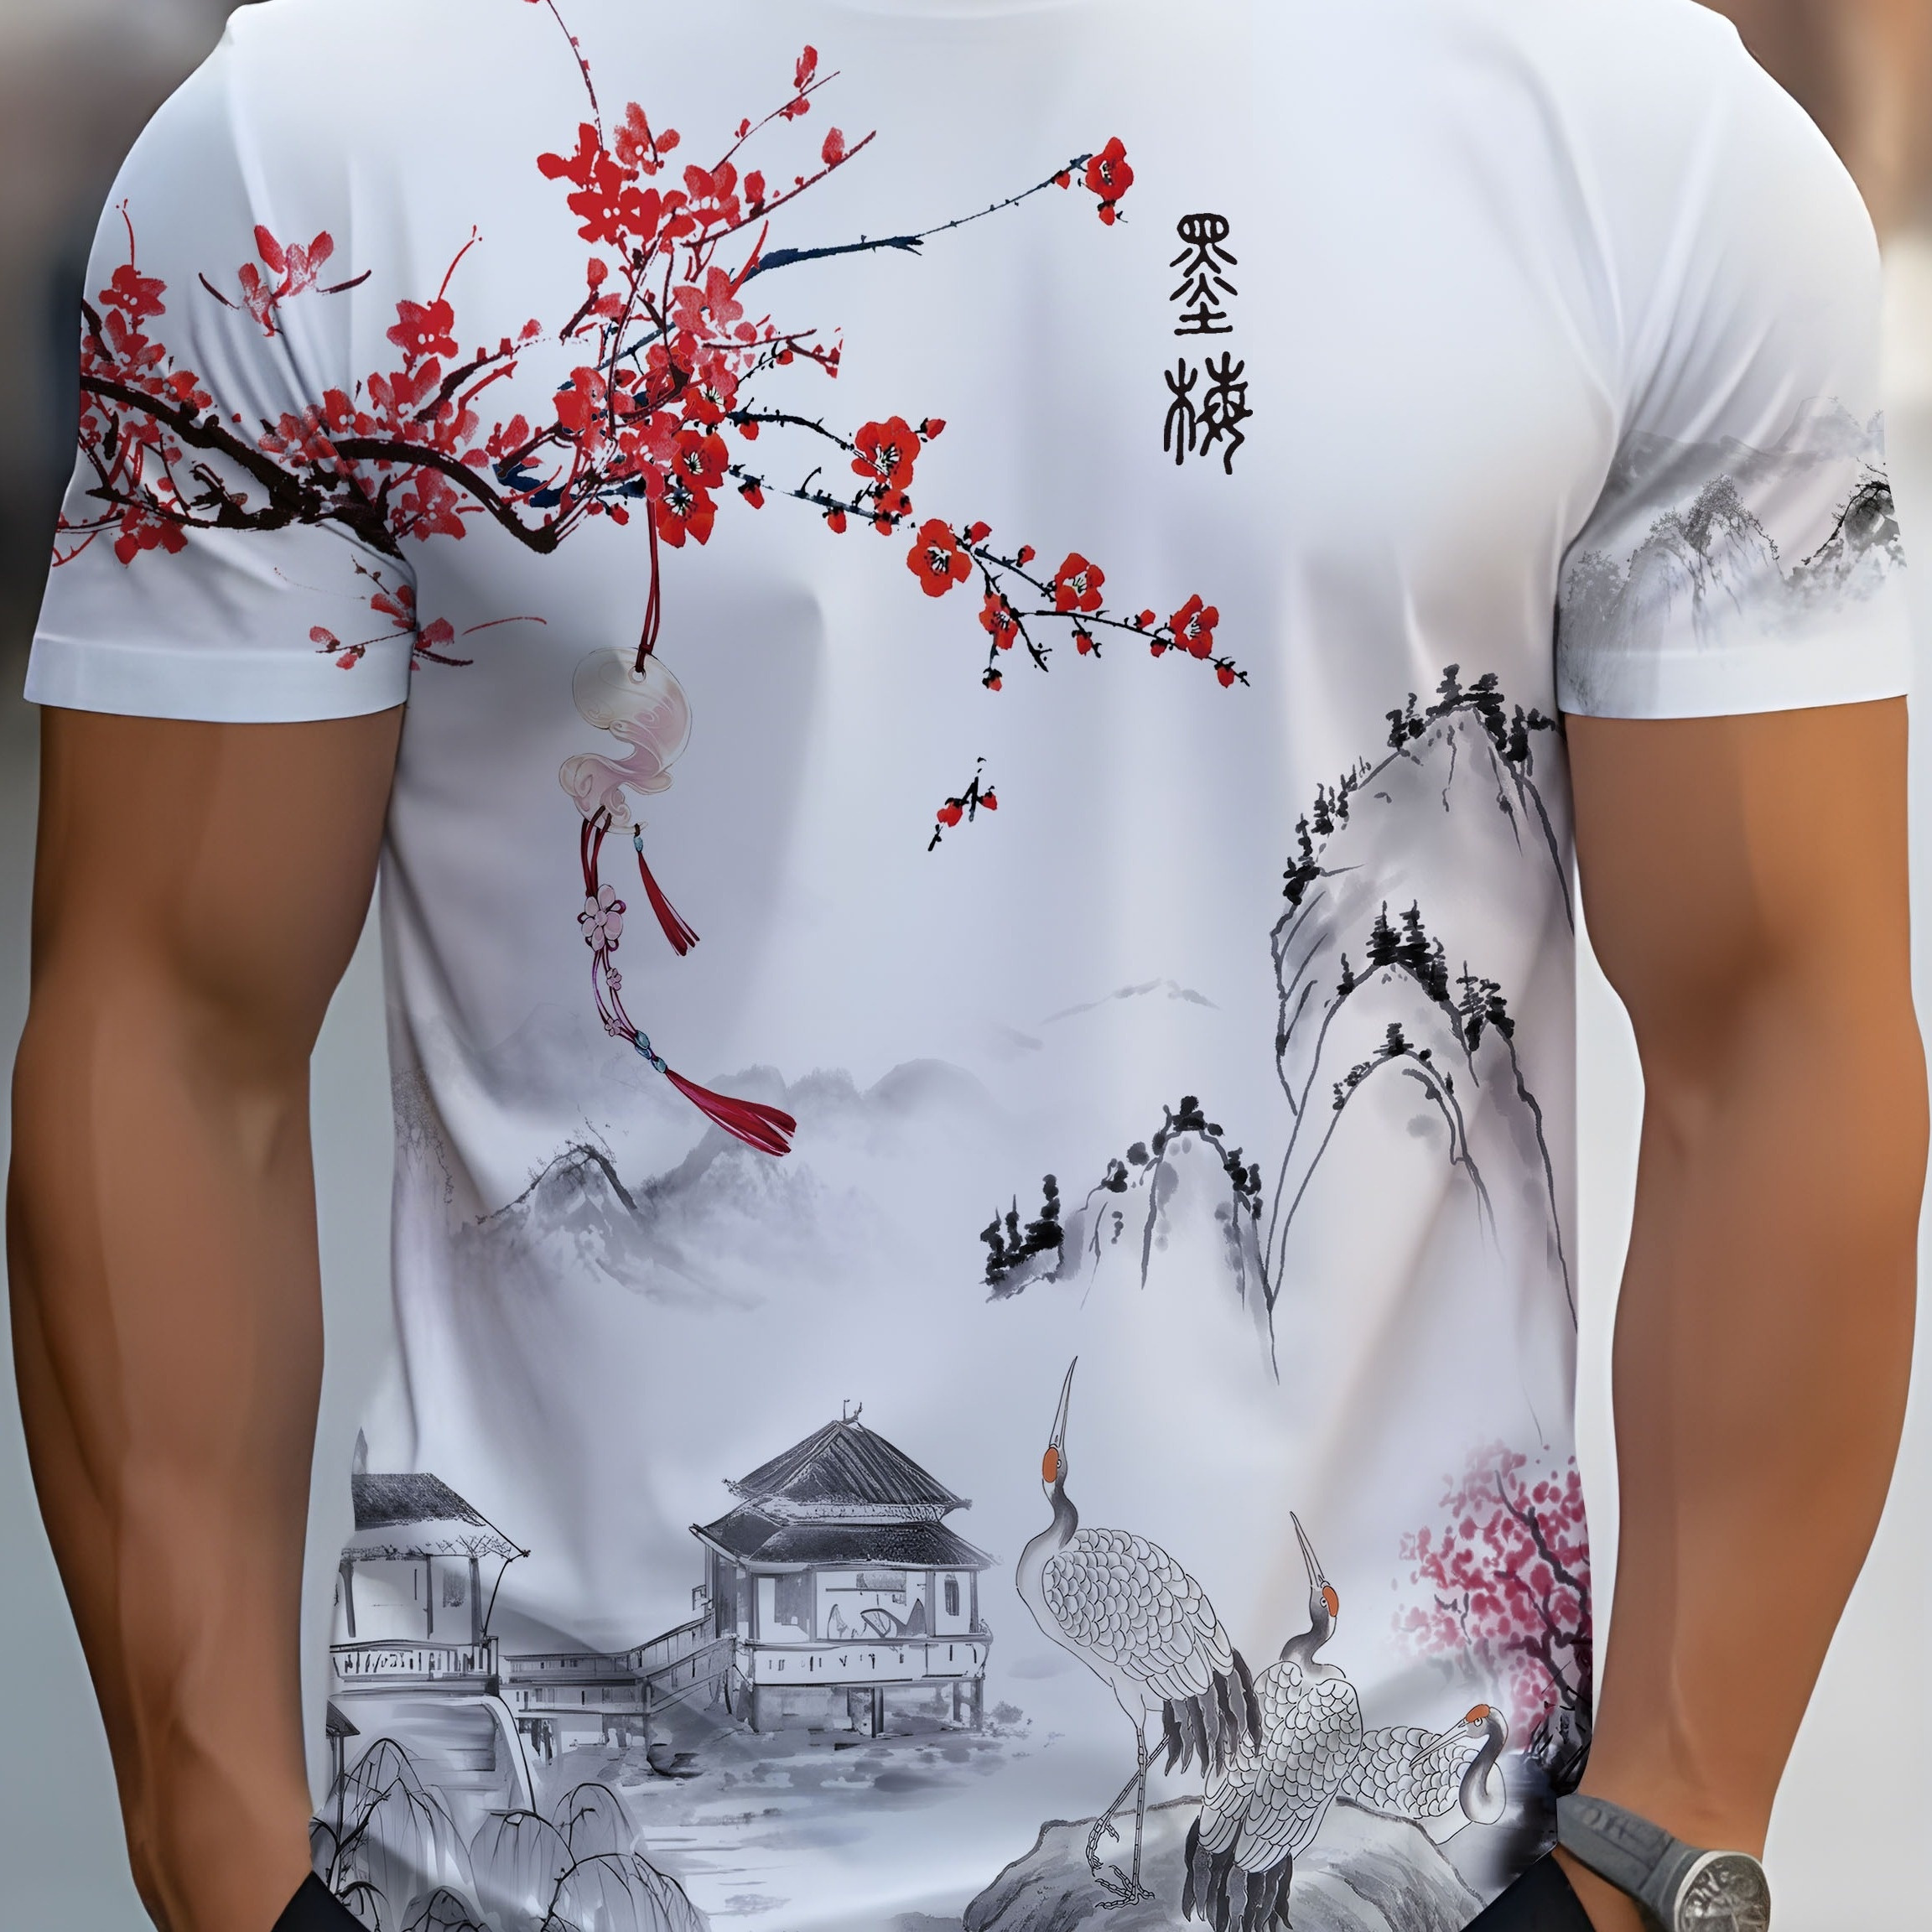 

Chinese Style Plum Blossom Pattern Print Crew Neck Short Sleeve T-shirt For Men, Casual Summer T-shirt For Daily Wear And Vacation Resorts